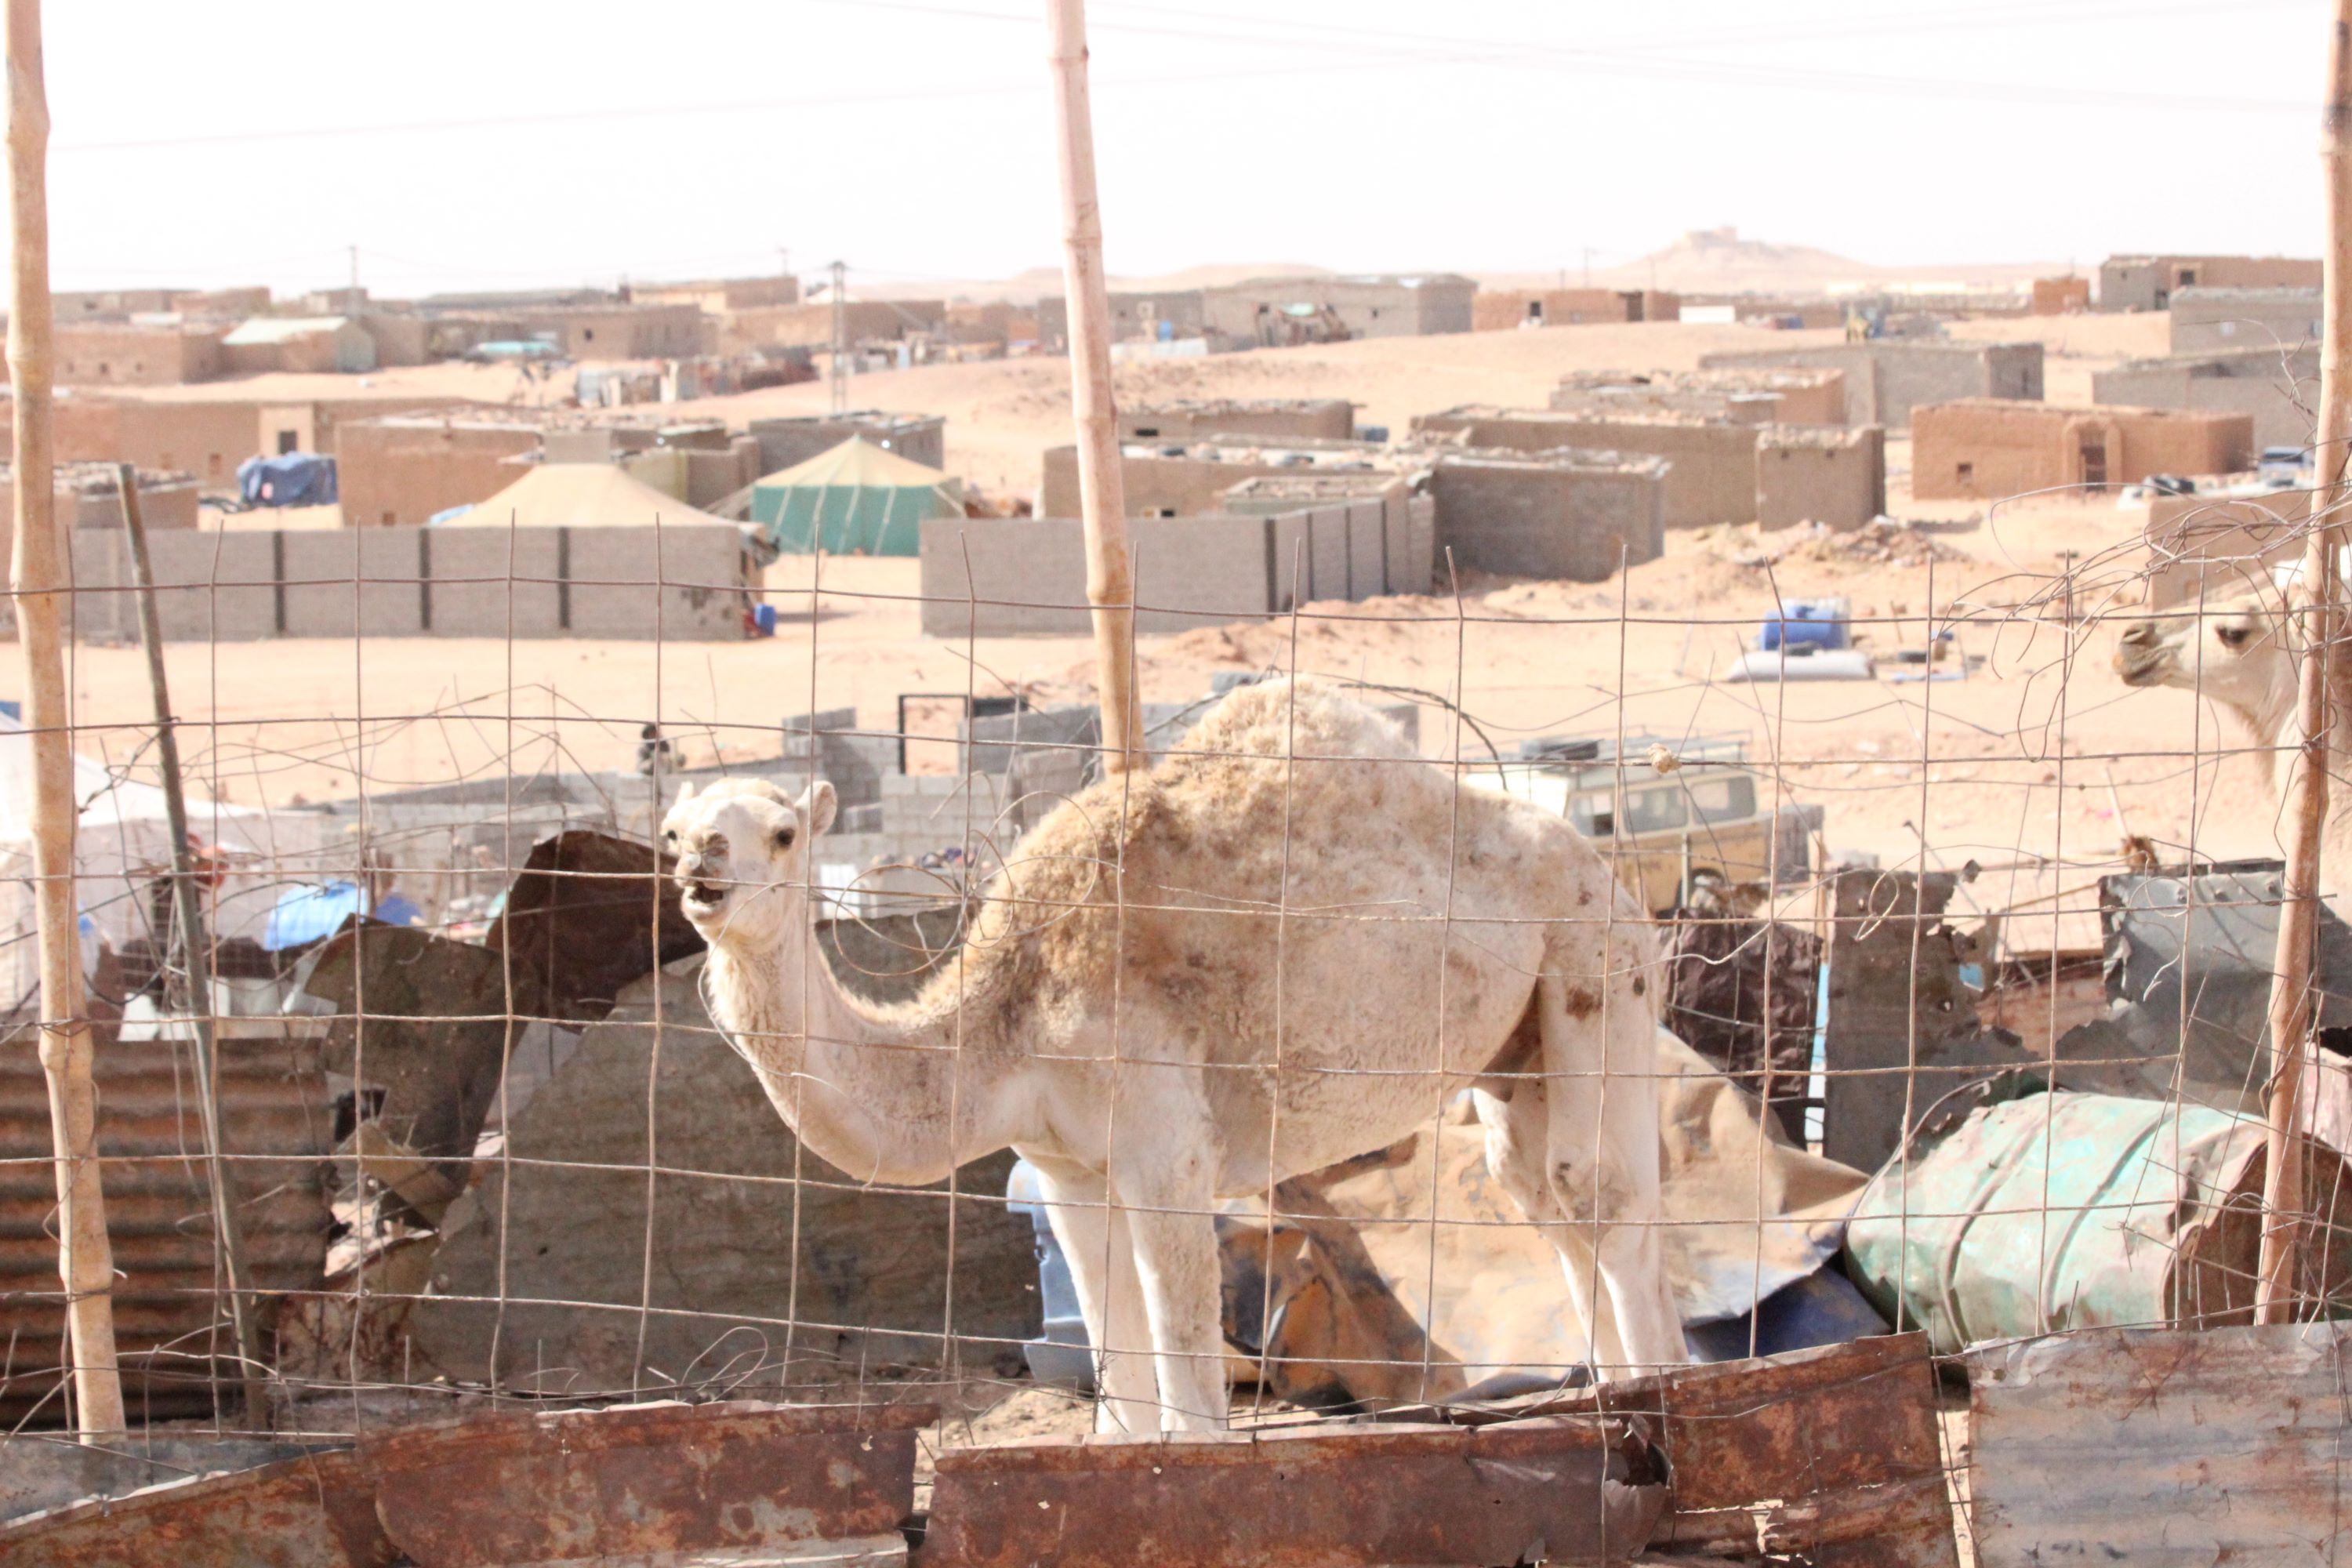 A camel in a pen in the middle of Ausserd refugee camp (MEE/Alex MacDonald)